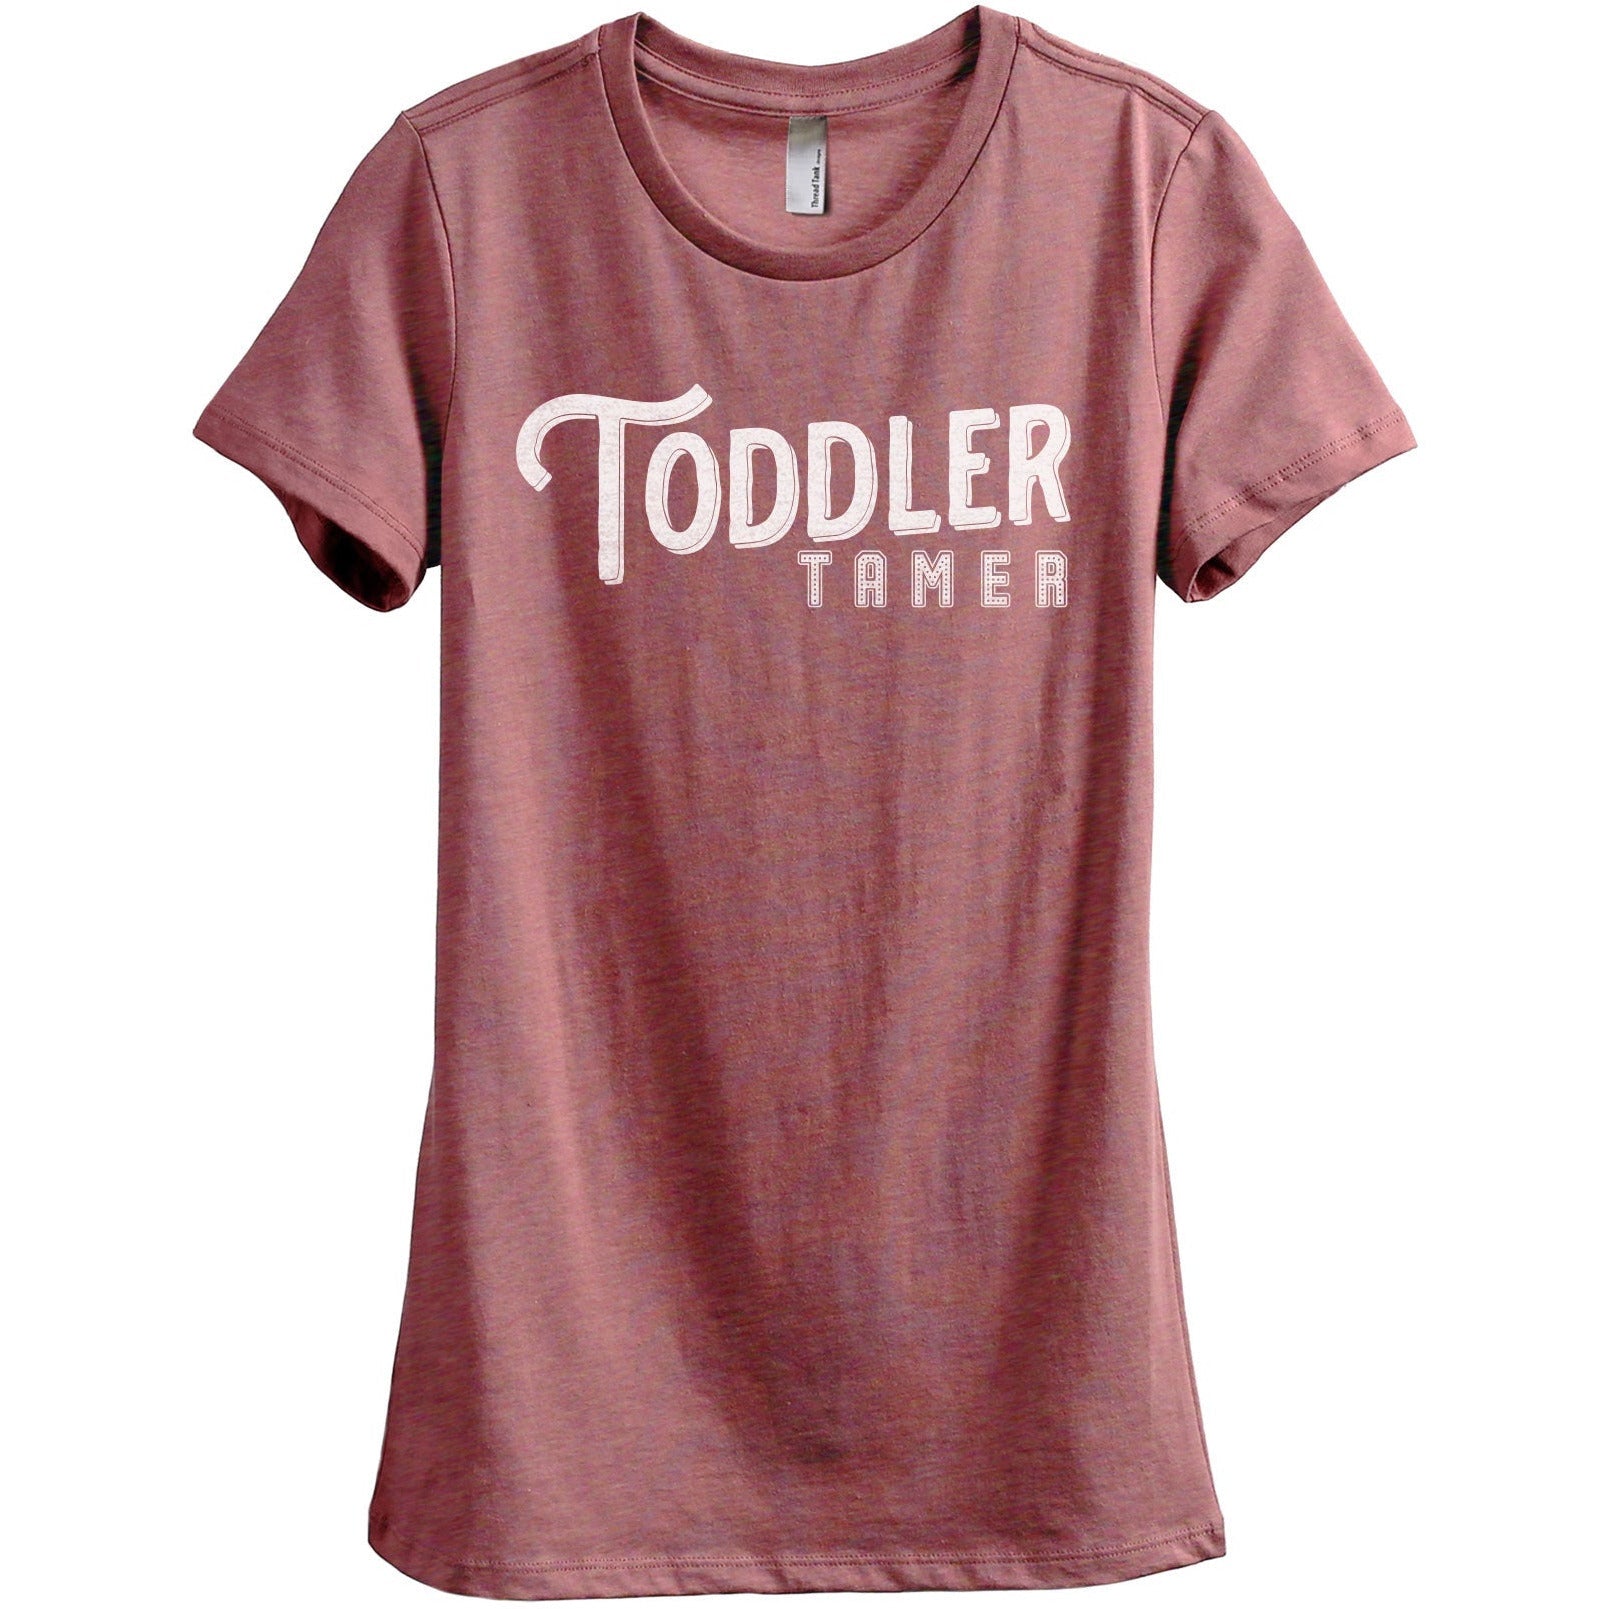 Toddler Tamer - Stories You Can Wear